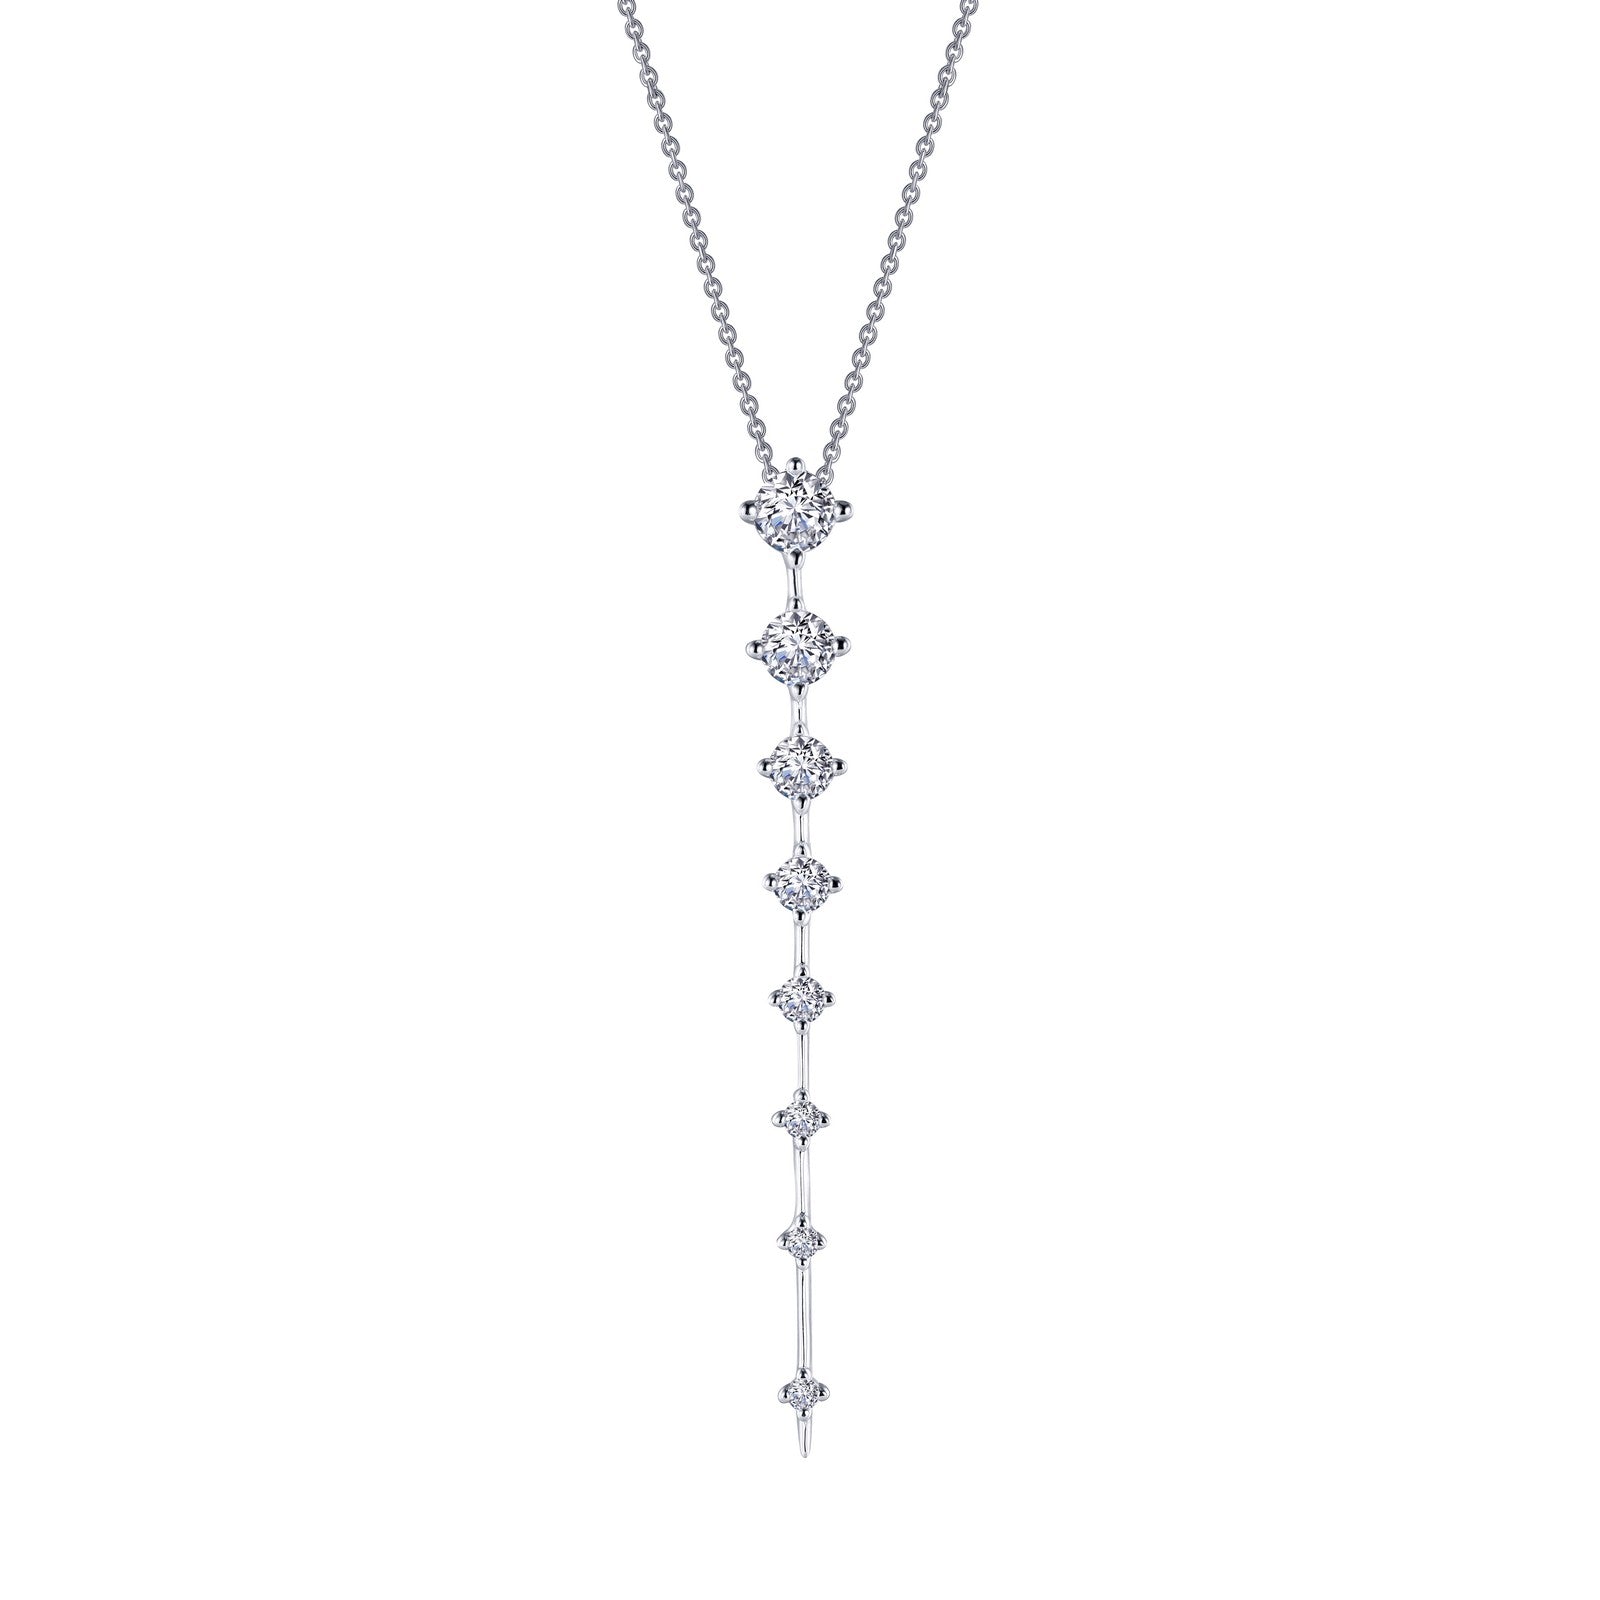 Adjustable Icicle Necklace